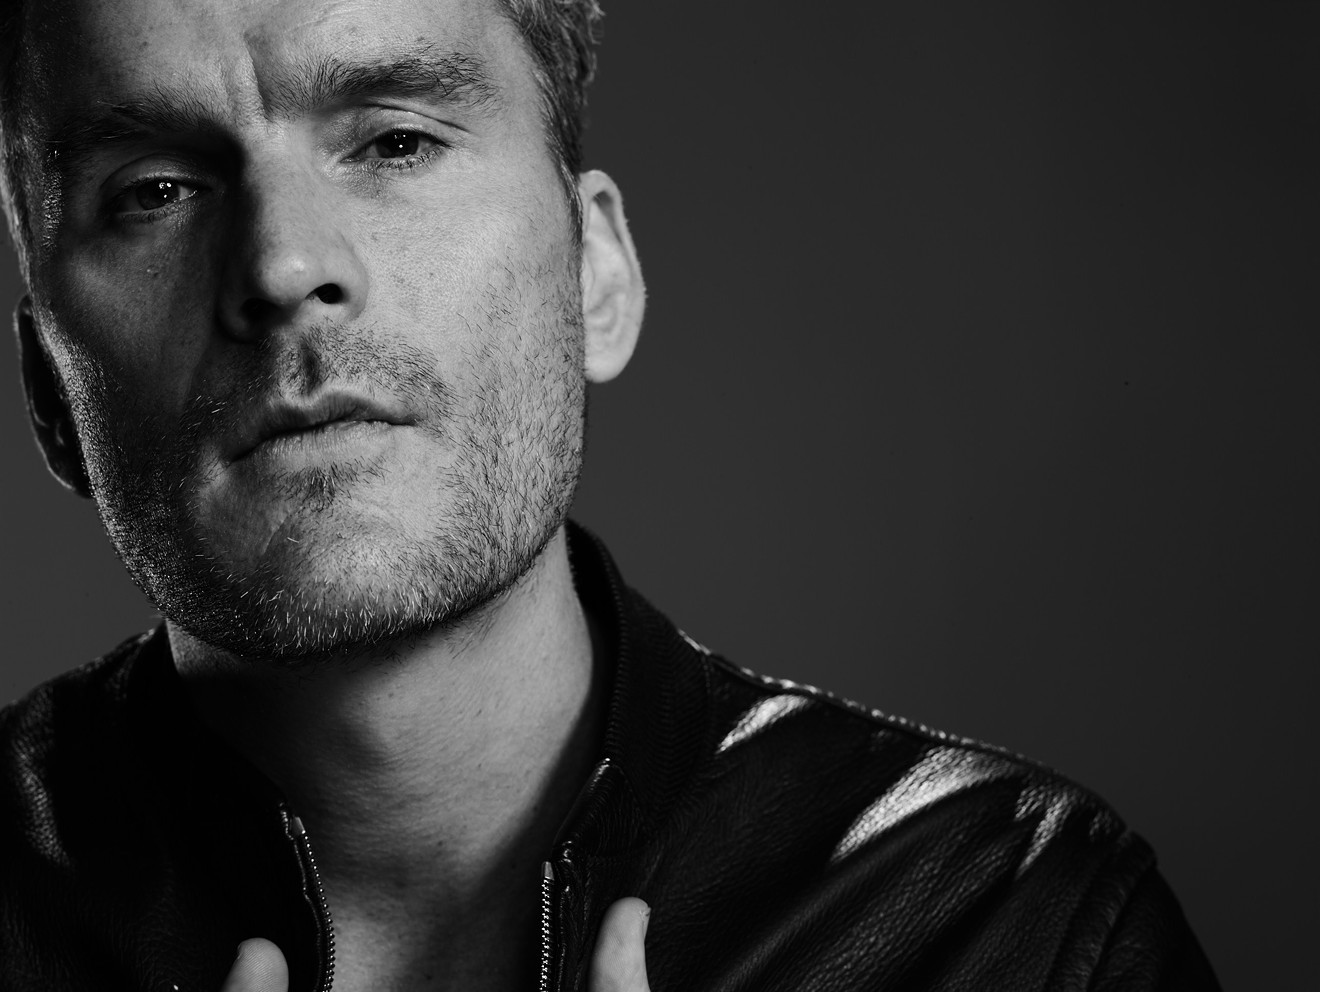 Balthazar Getty says he has a great professional relationship and personal friendship with David Lynch, who directed him in the film Lost Highway and on TV with Twin Peaks: The Return. 